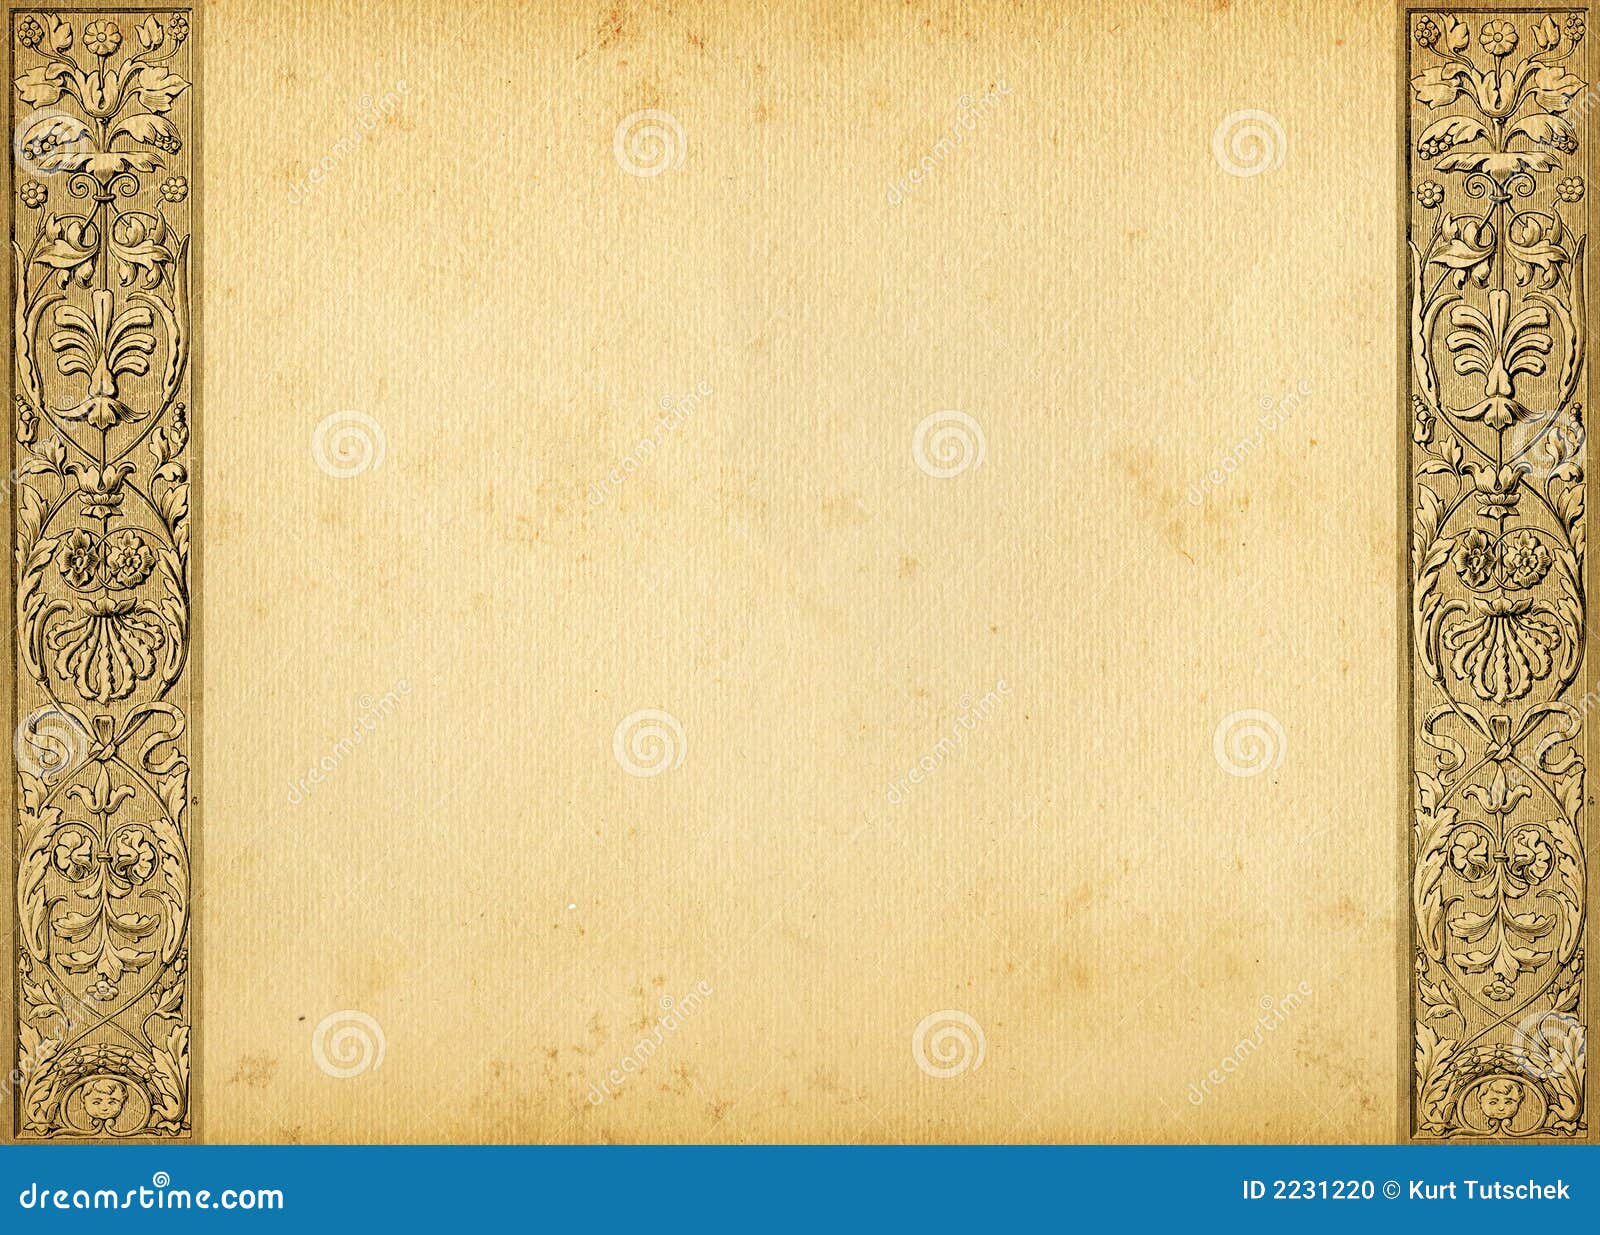 Renaissance background 1 stock photo. Image of paper, stain - 2231220